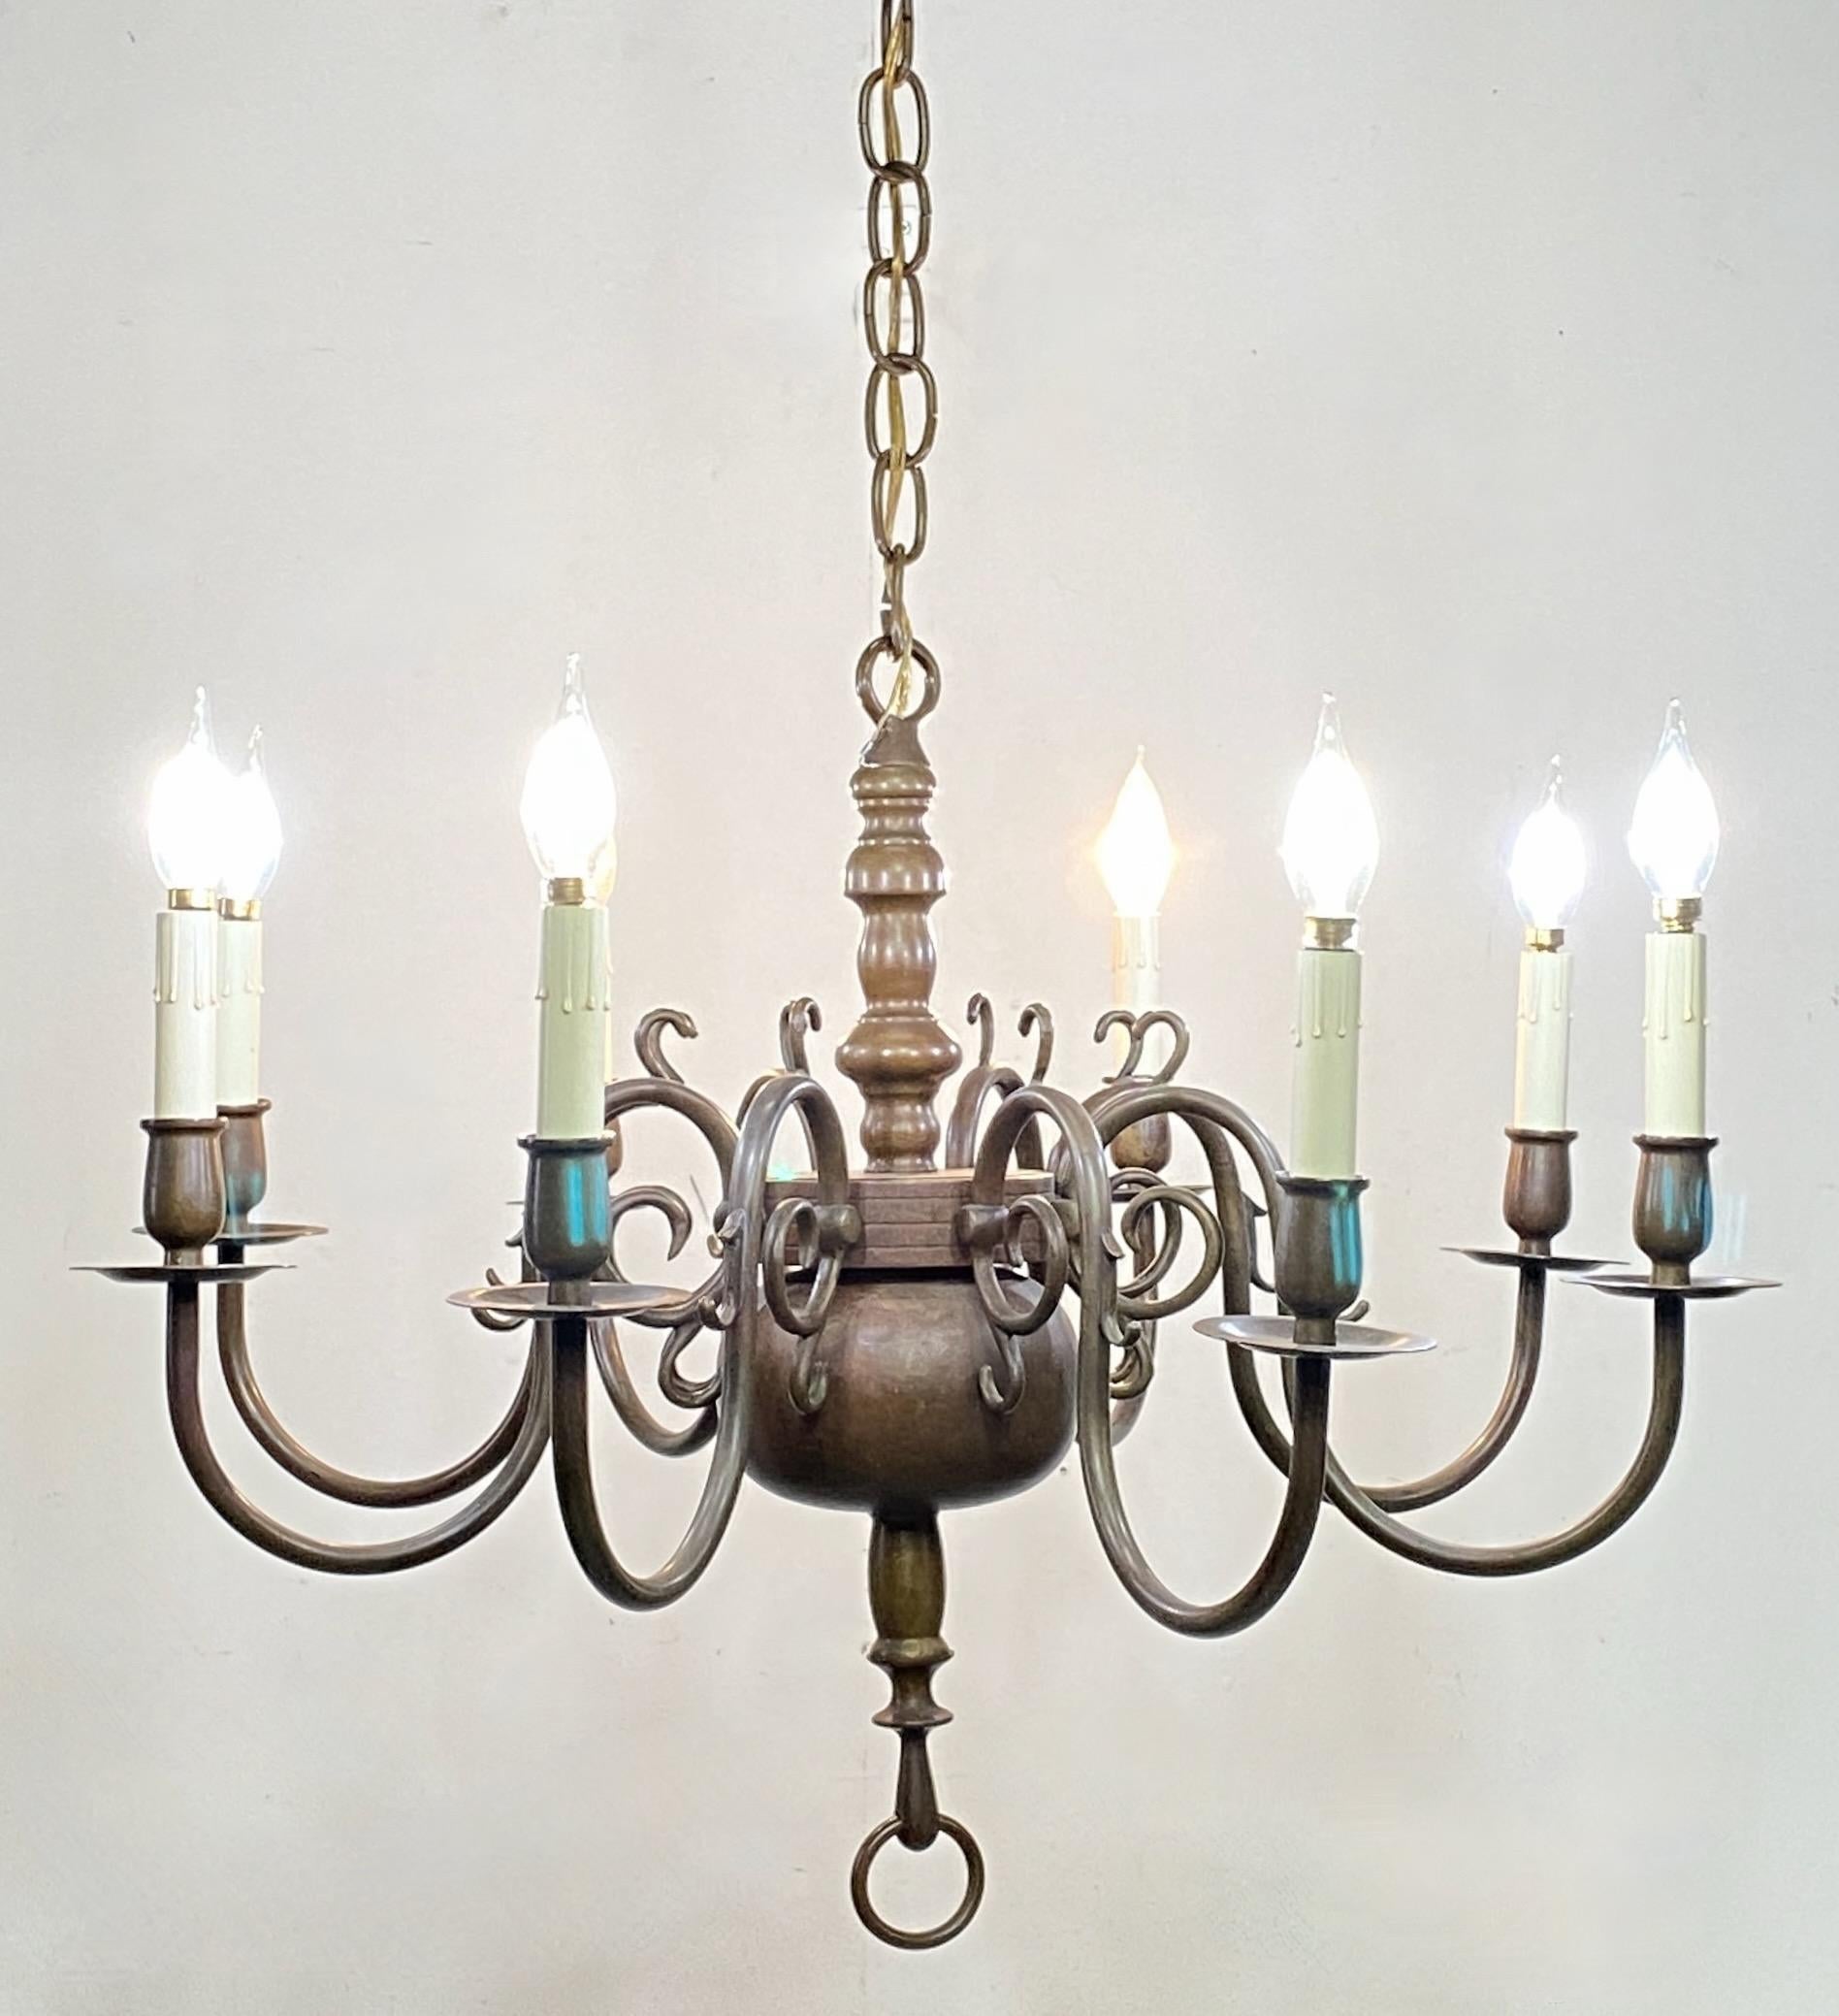 An early to mid 20th century Dutch or Flemish style bronze eight arm light fixture. Very accurate and high quality in excellent condition. Completely original, recently reconditioned. 
Chain can be shortened to suit the buyers needs at no extra